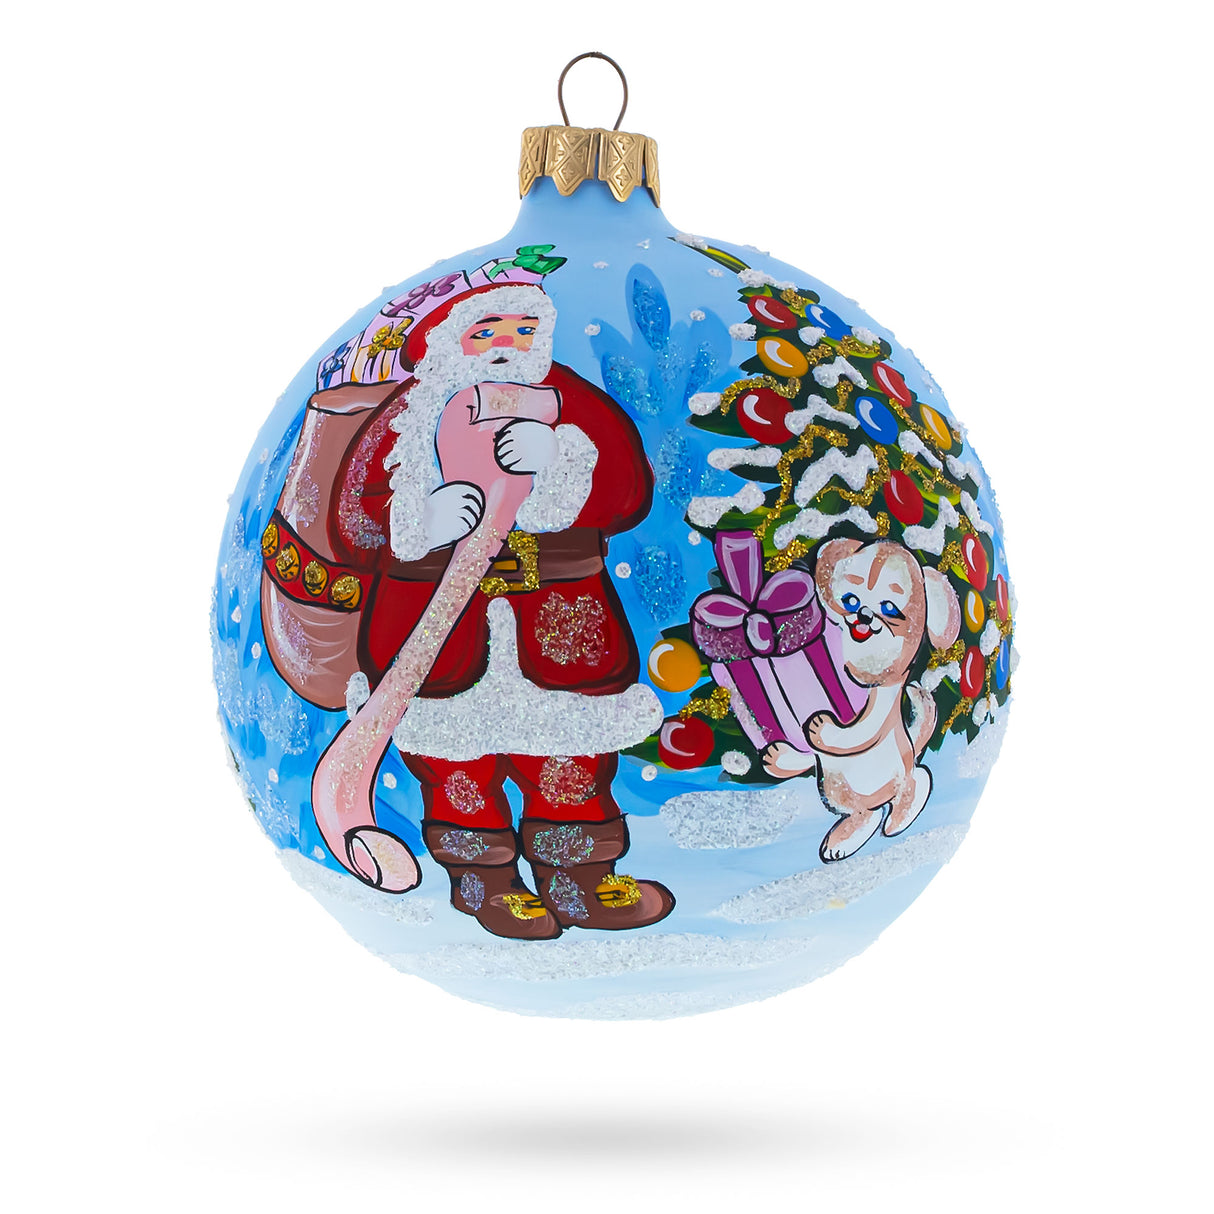 Jolly Checklist: Santa's Gift List and Loyal Dog Blown Glass Ball Christmas Ornament 4 Inches in Blue color, Round shape